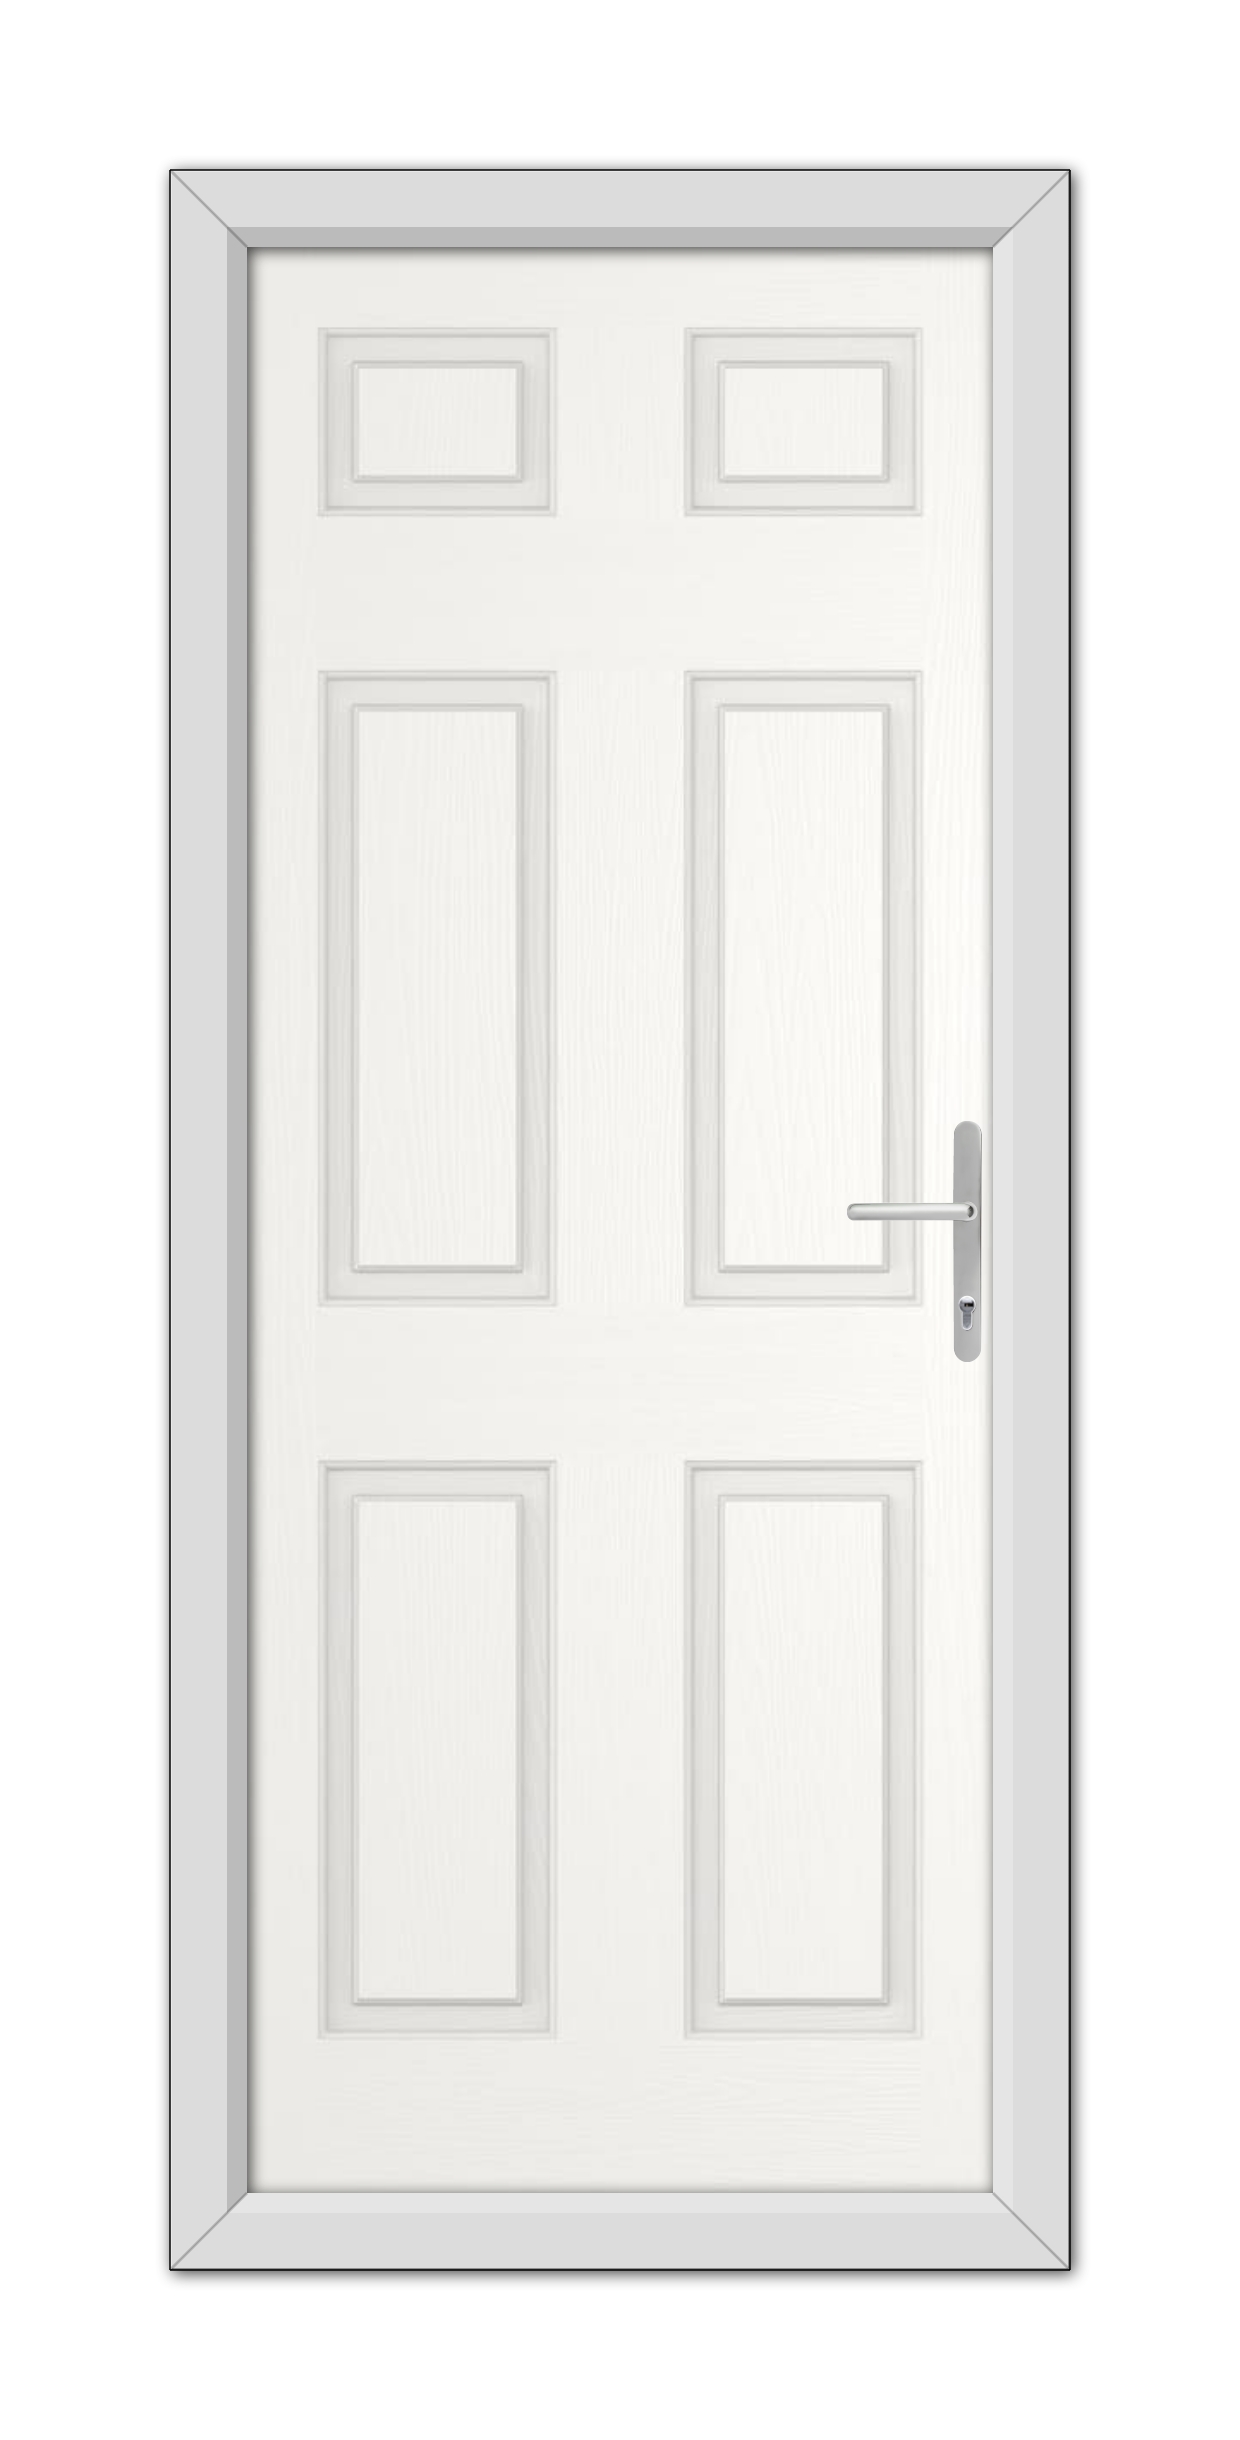 A closed White Middleton Solid Composite Door 48mm Timber Core with six panels and a silver handle, set within a simple frame.